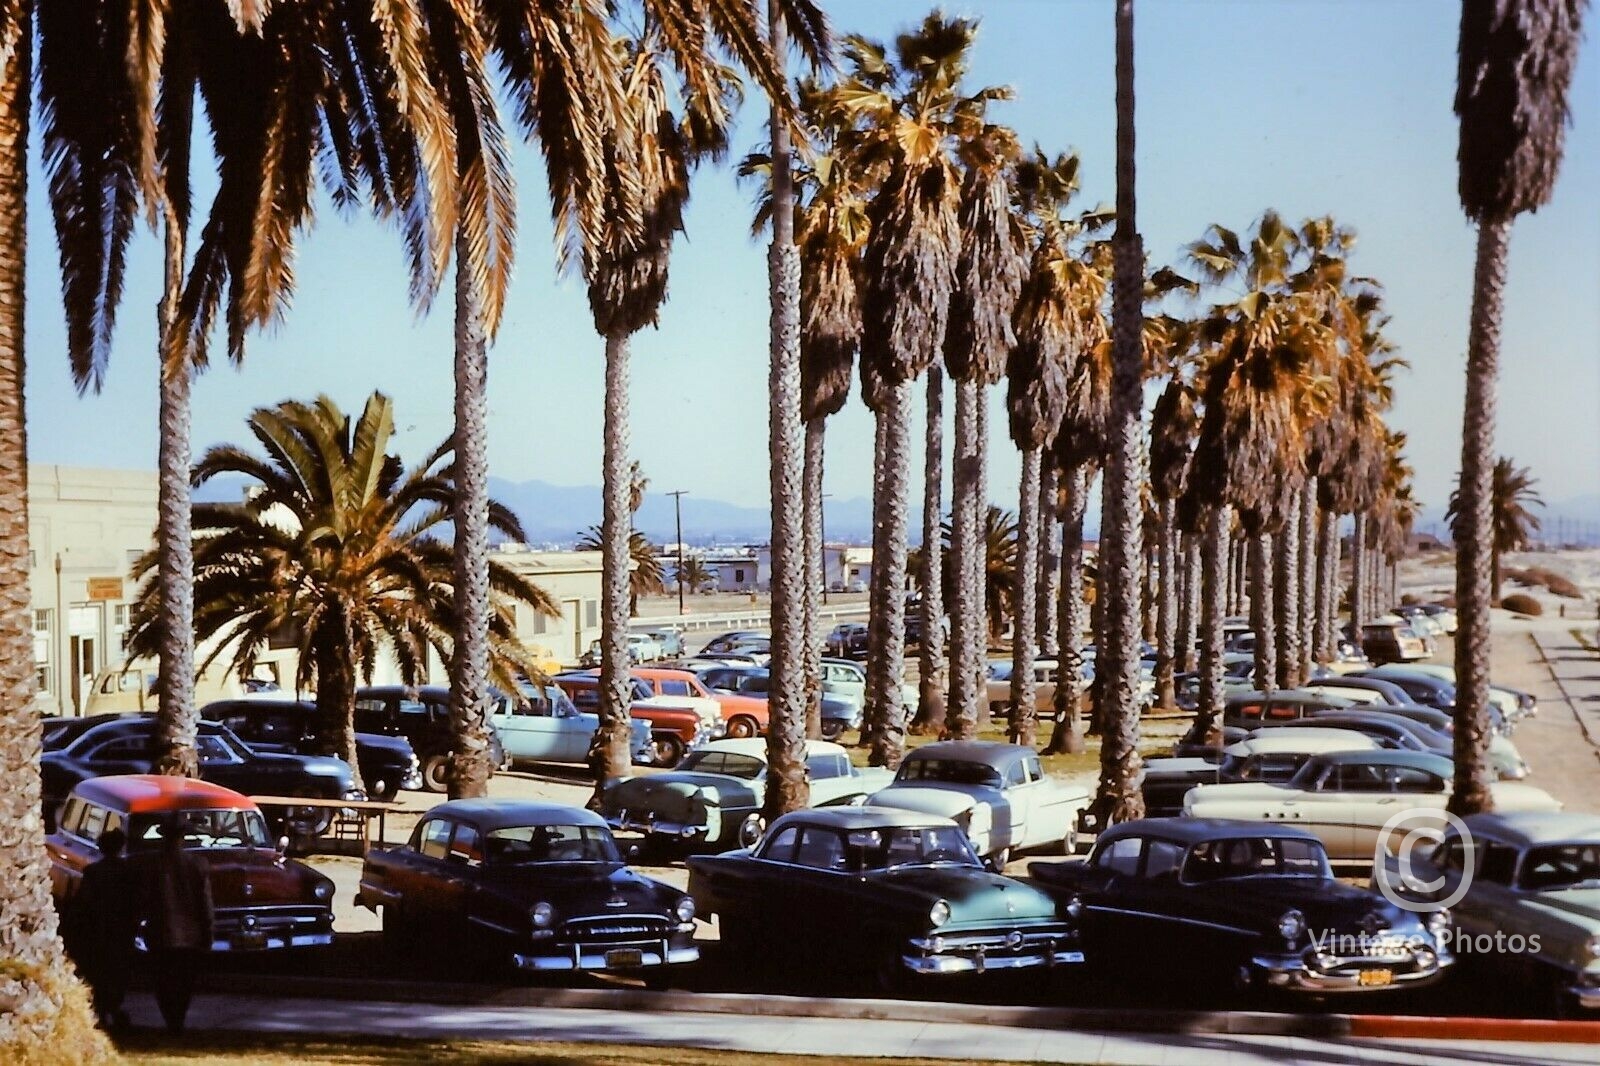 1950s American Classic Cars - parking lot